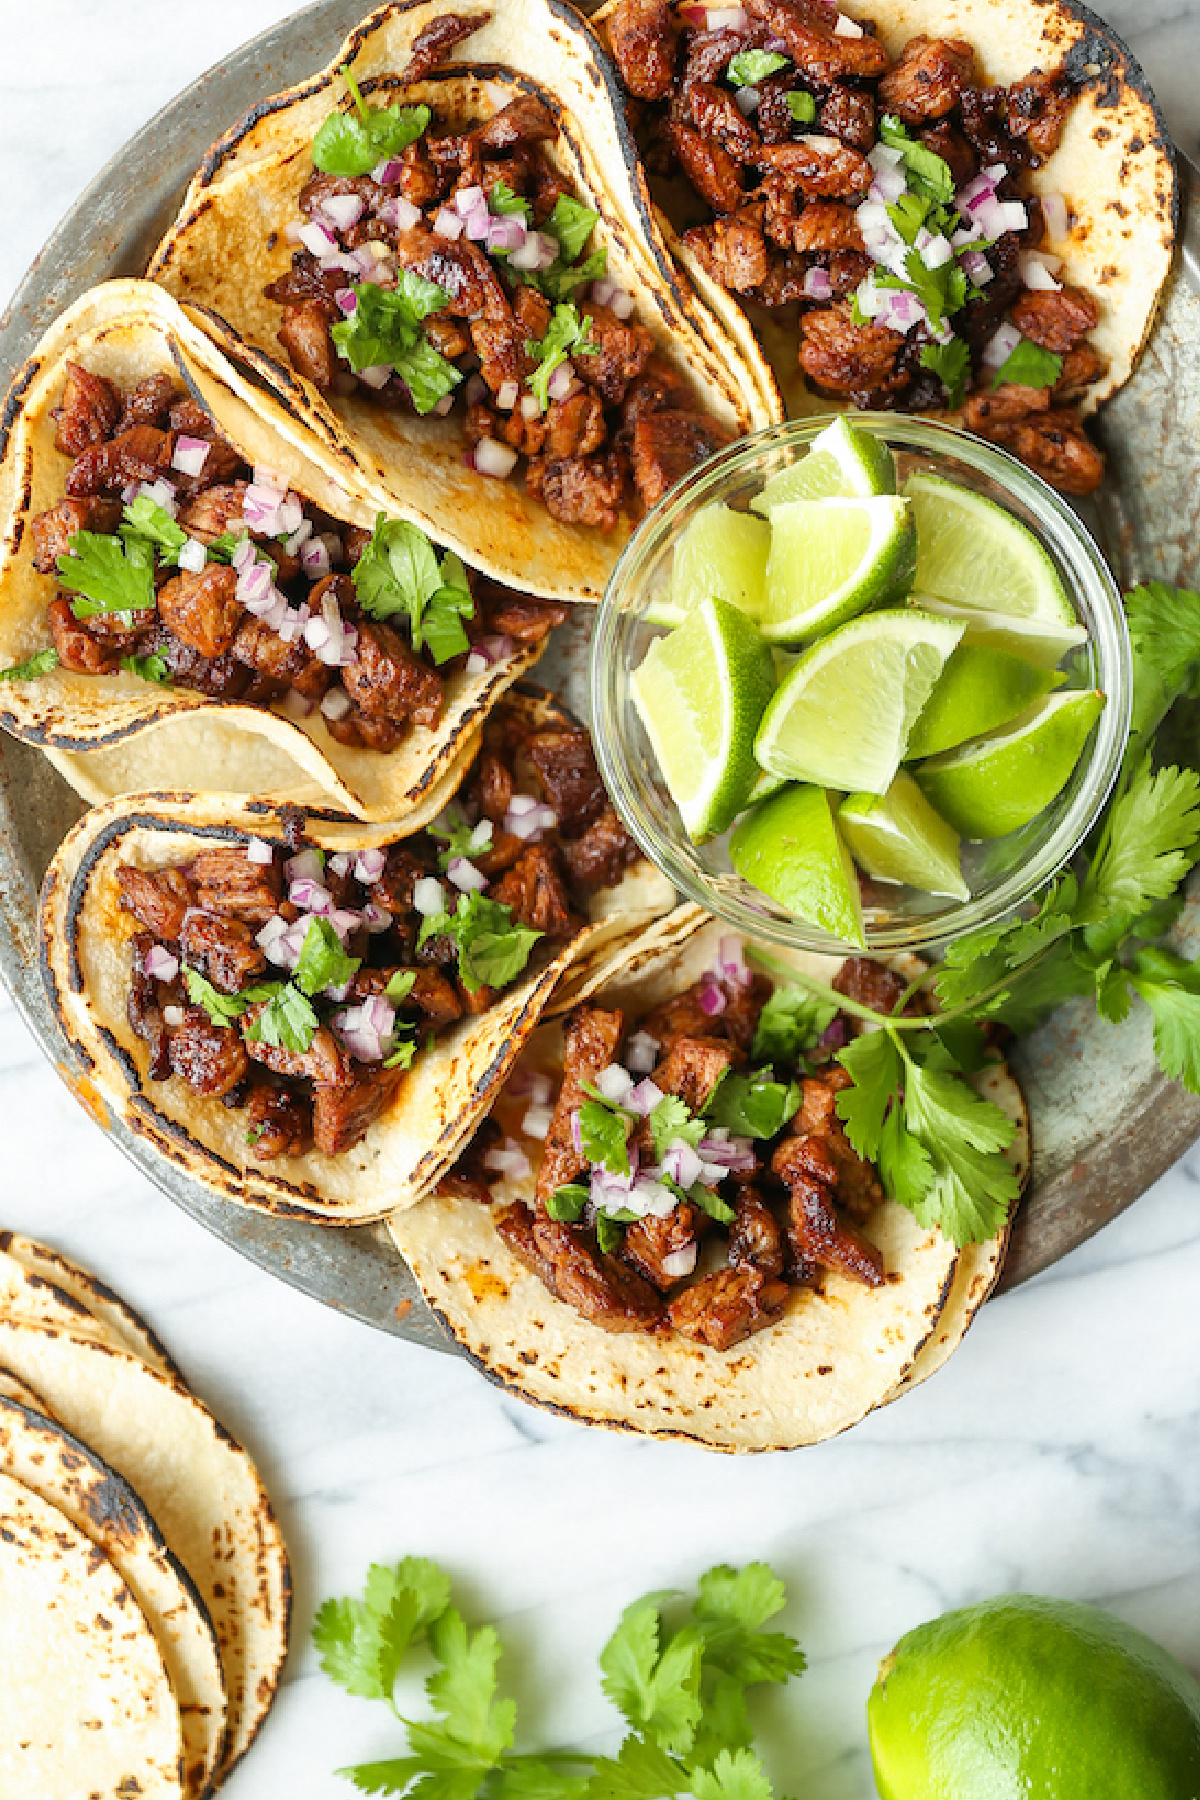 Cheap Party Food Ideas -  Taco Bar with Affordable Fillings